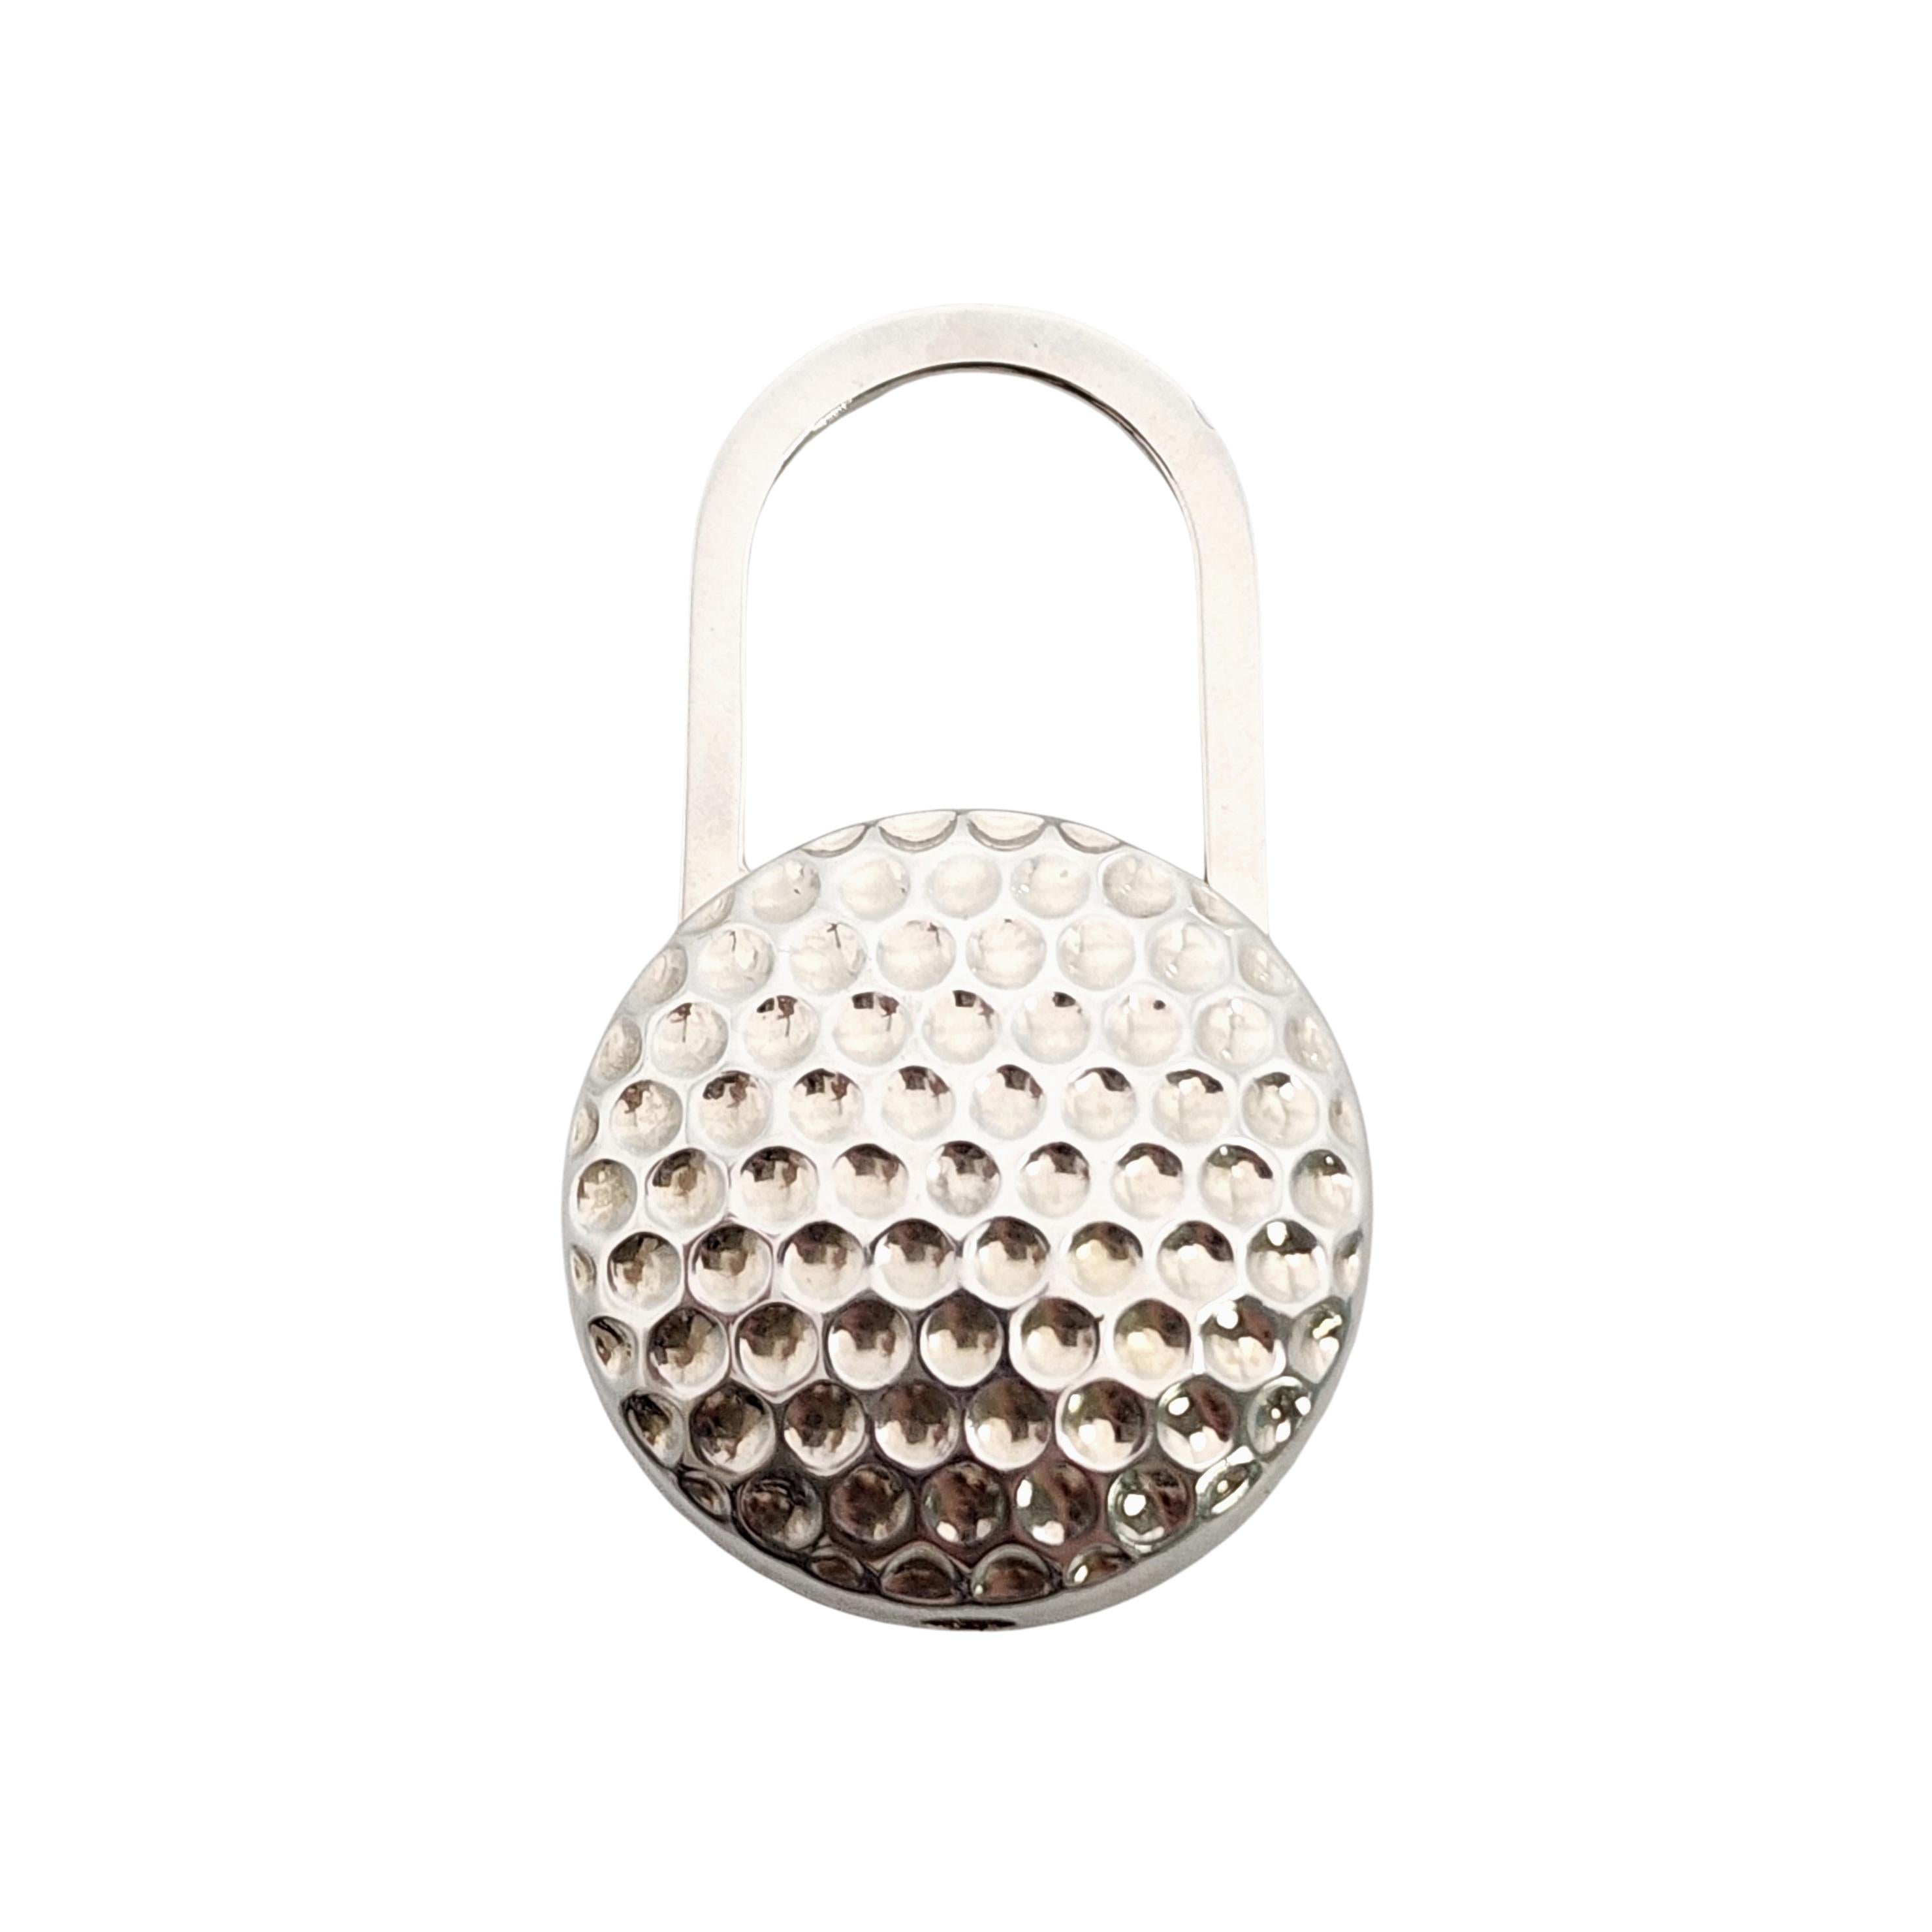 Sterling silver golf ball padlock key ring by Tiffany & Co with pouch and box.

A classic padlock design featuring a detailed golf ball. Pull up and twist to add keys. Tiffany box and pouch are included.

Measures approx 2 1/8